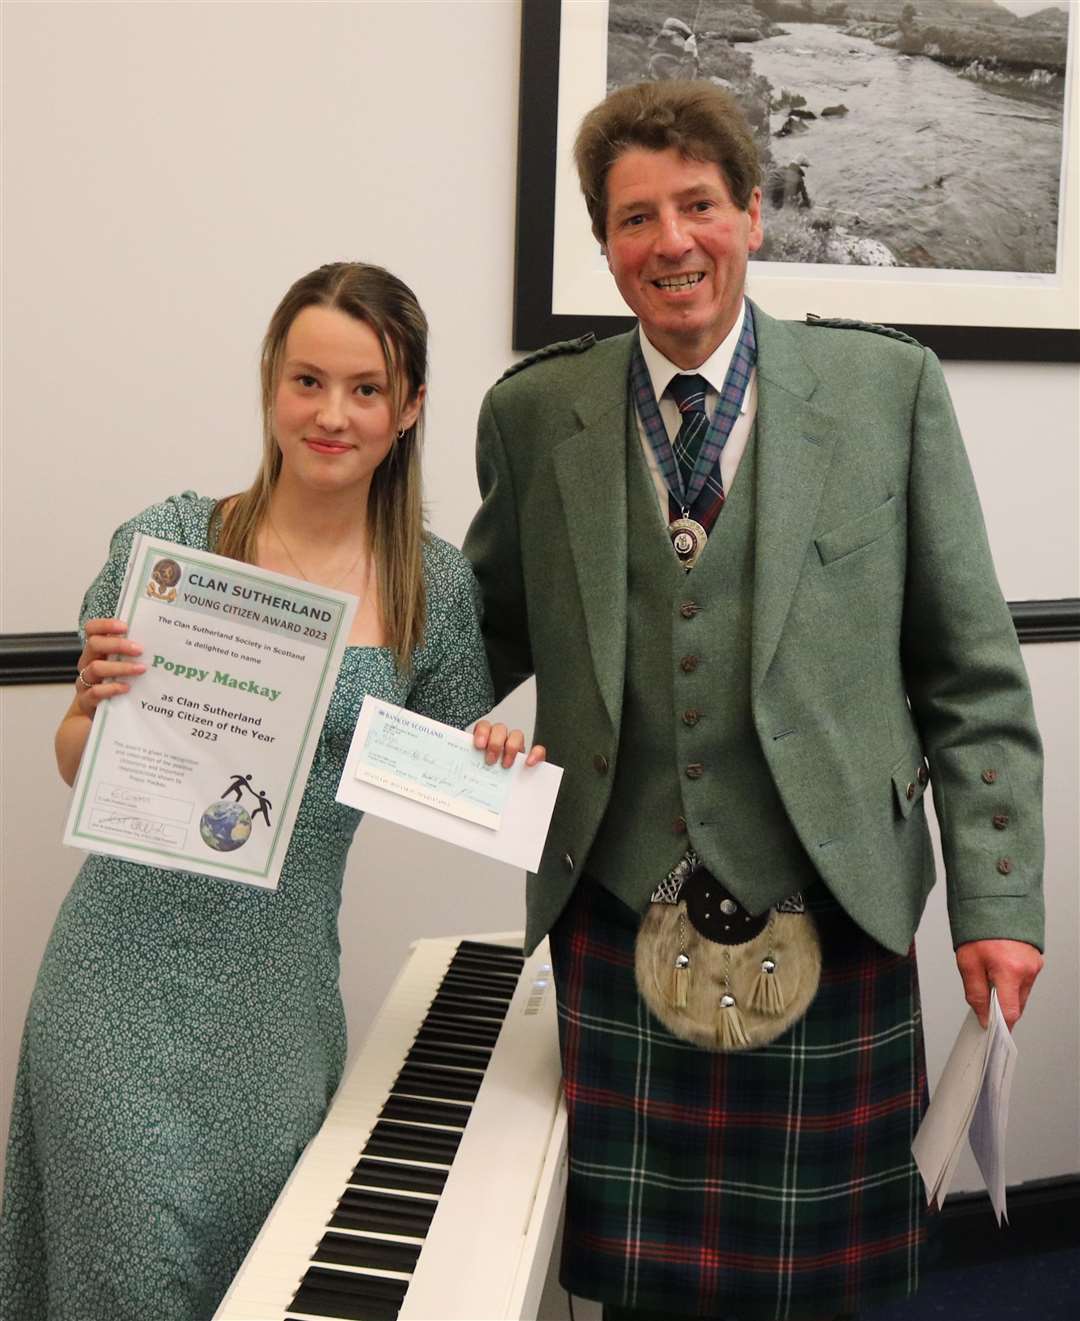 Mark Sutherland-Fisher presented Poppy Mackay with the award at dinner held as part of the Clan Sutherland Gathering. Picture: Bryce Sutherland